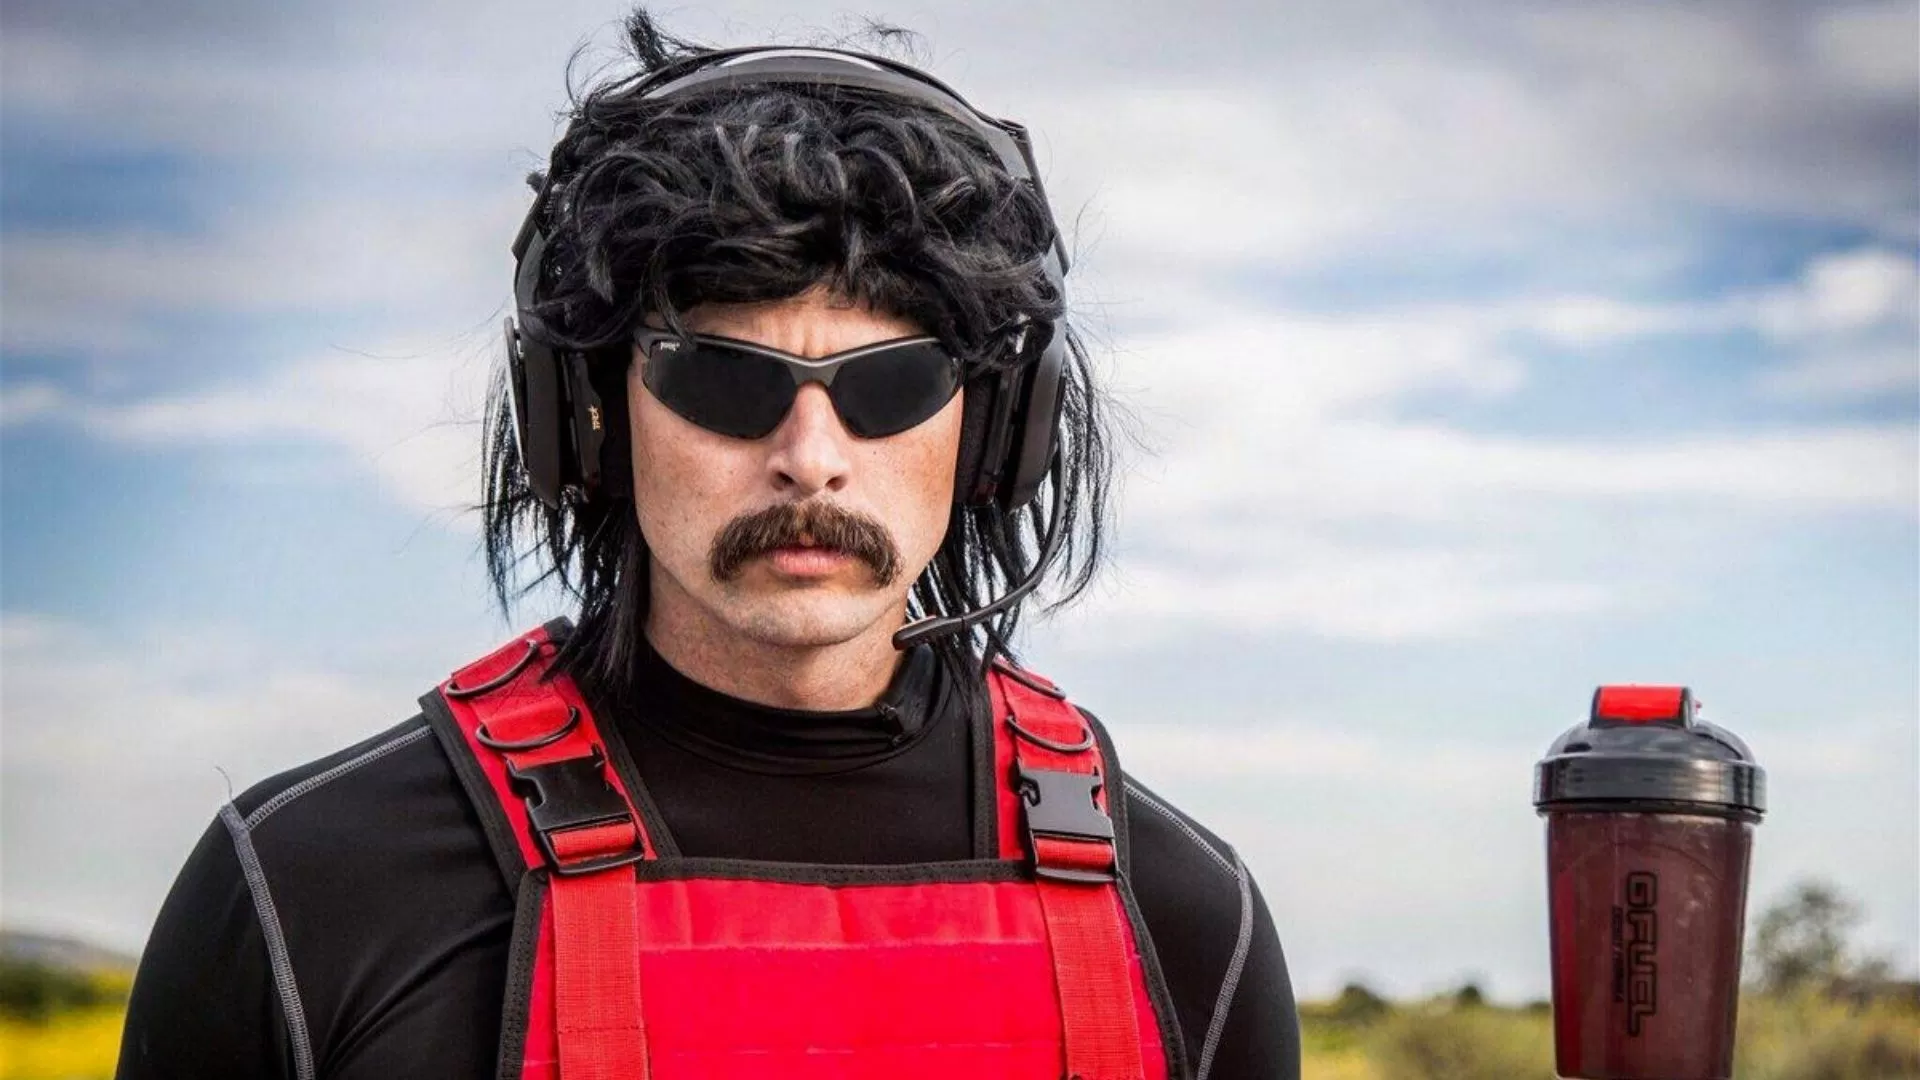 Dr Disrespect returns to streaming later today